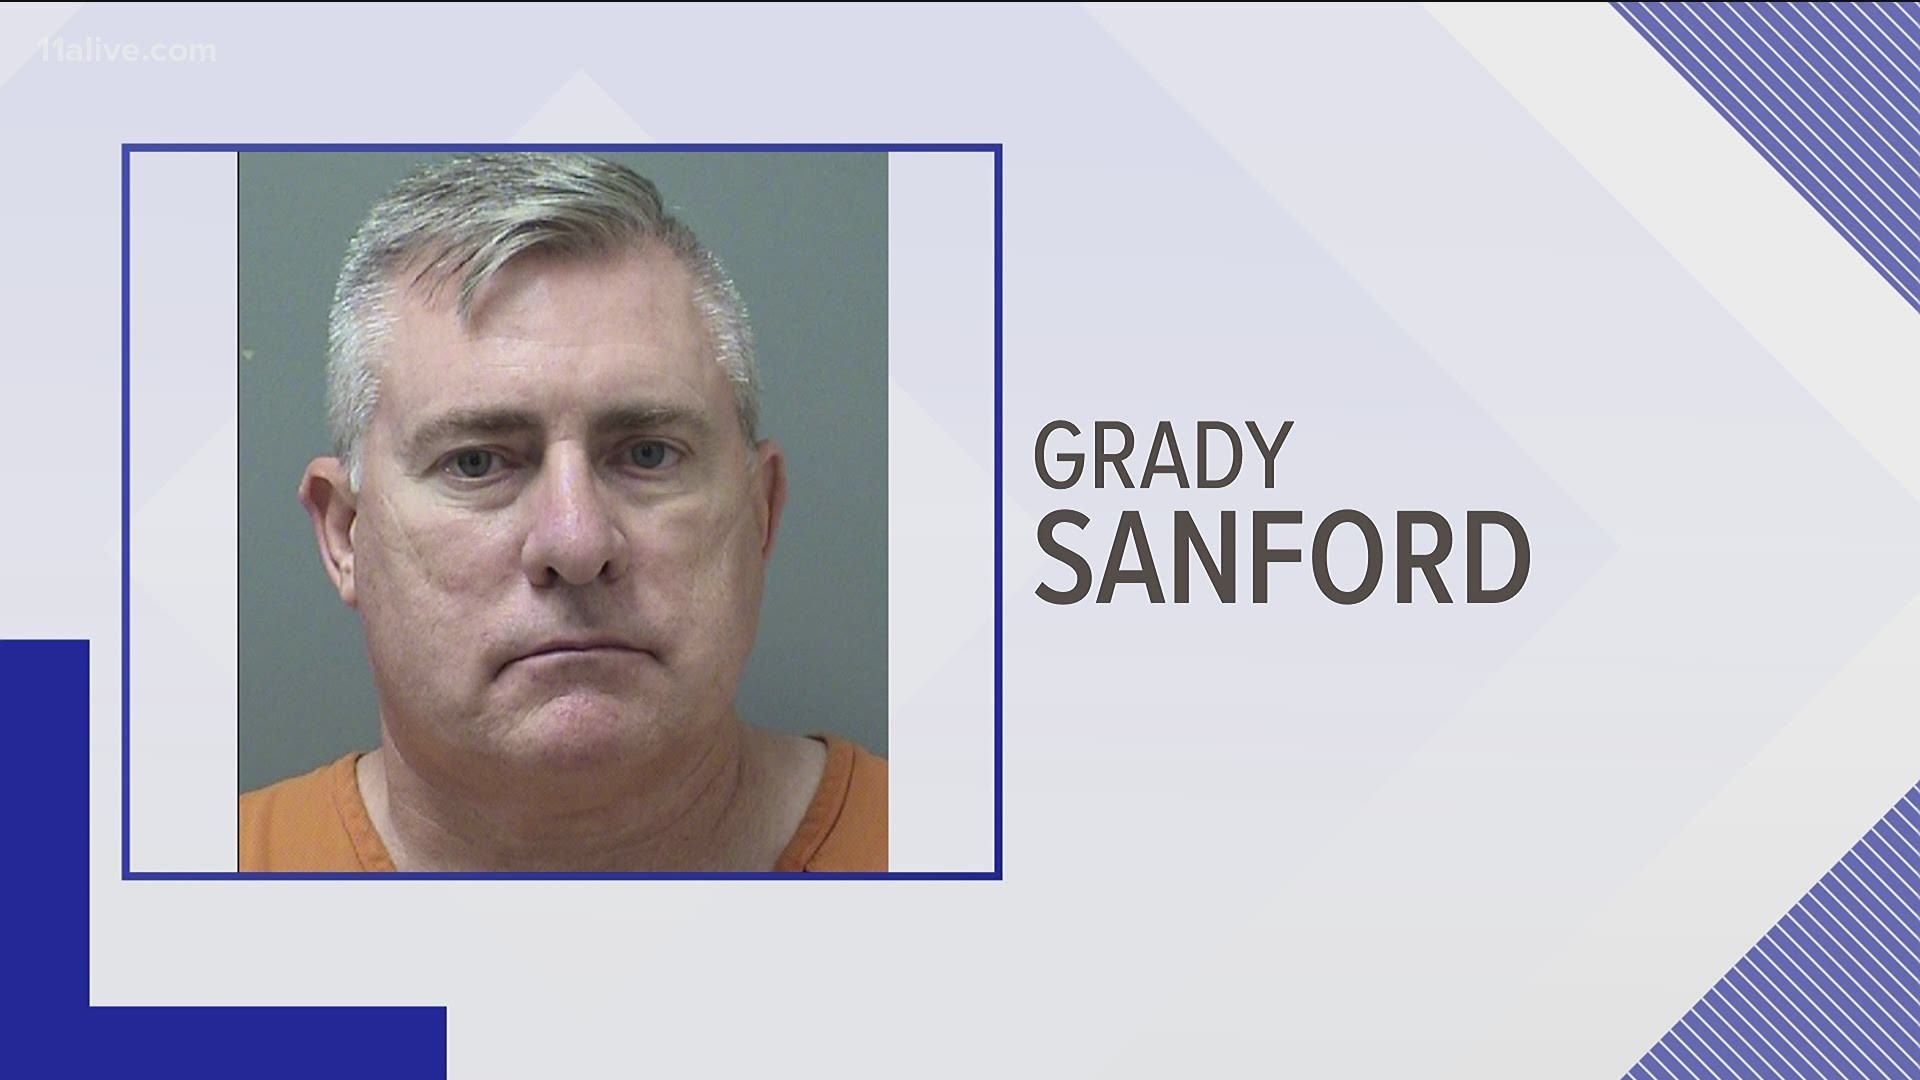 Grady Sanford, 56, was arrested and charged Tuesday, following the execution of a search warrant on his Windsor Green Court home in Canton just after 7:30 a.m.